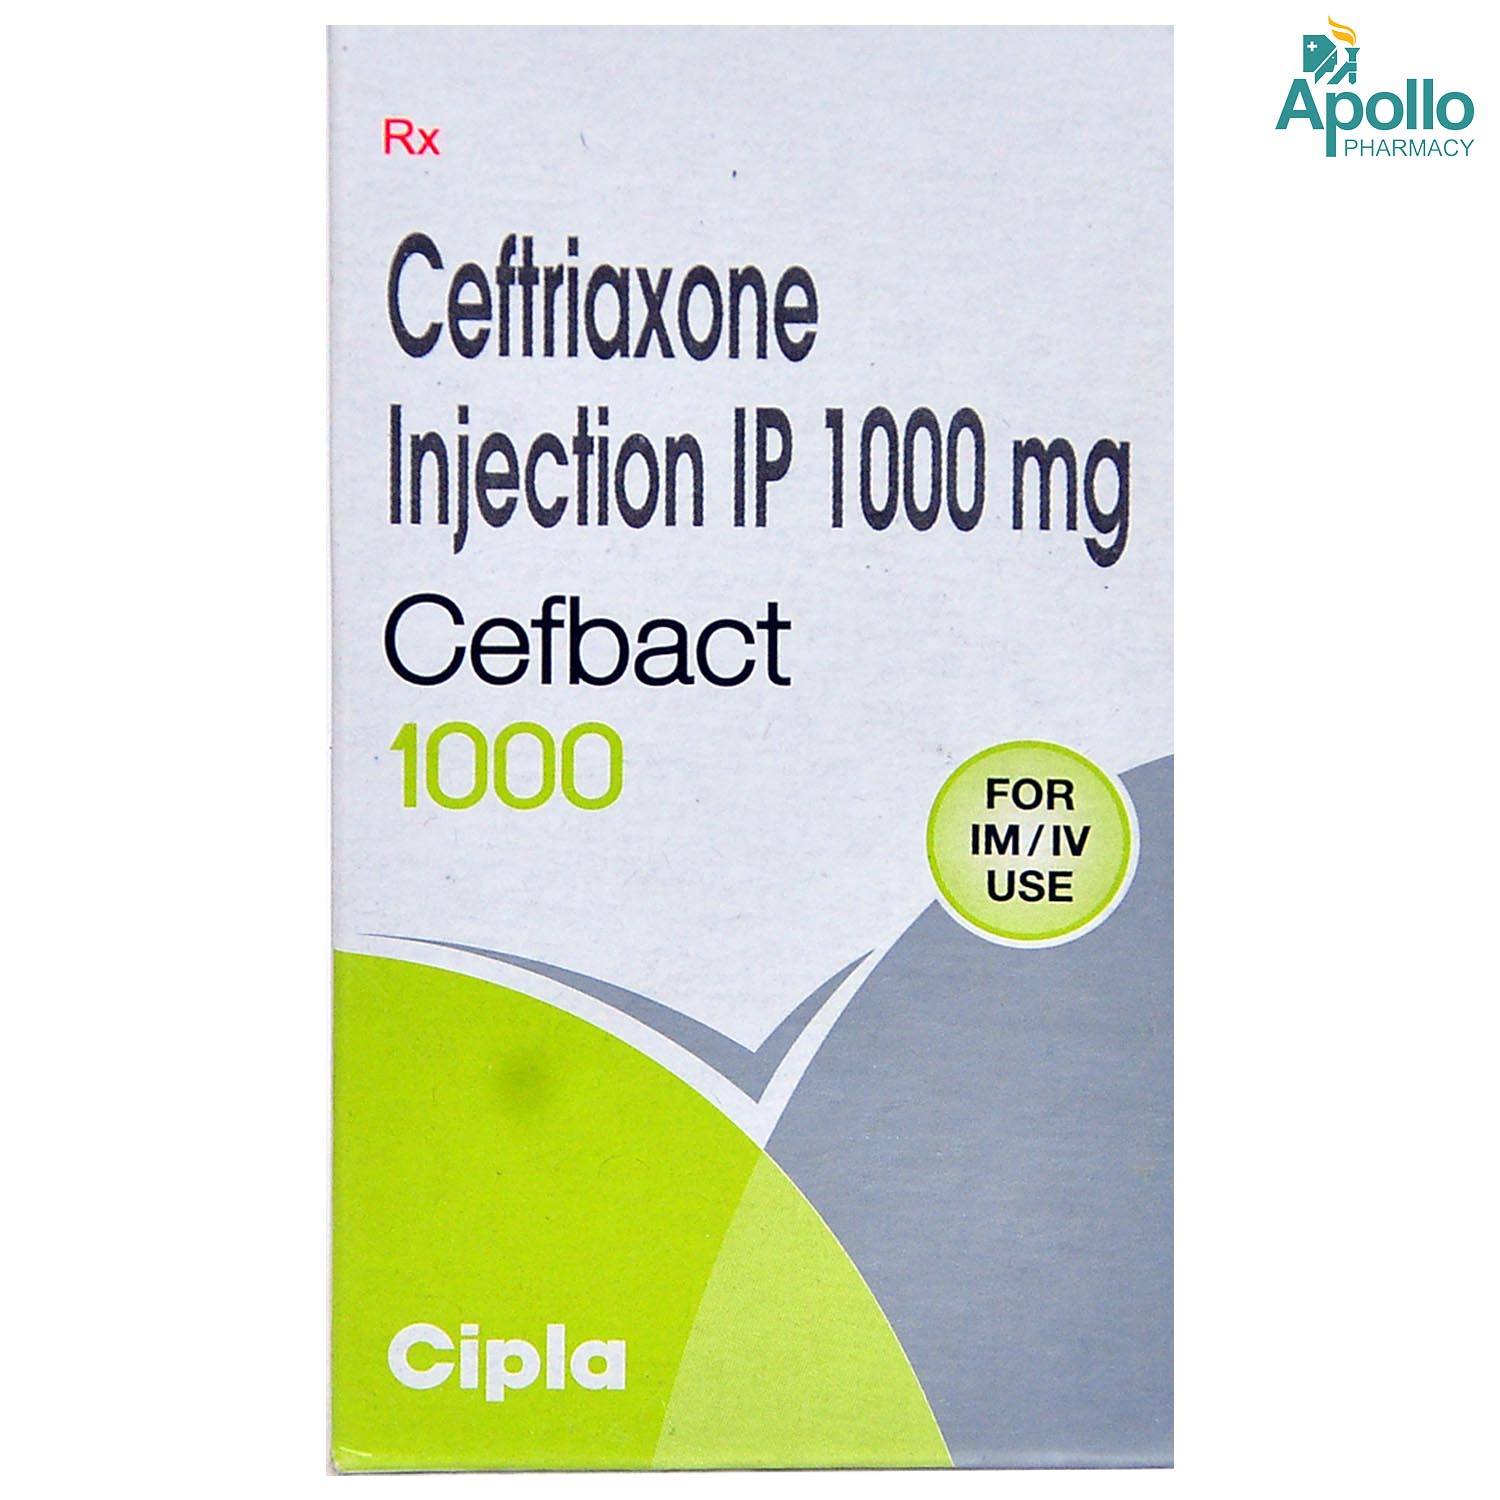 Buy Cefbact 1 gm Injection 1's Online